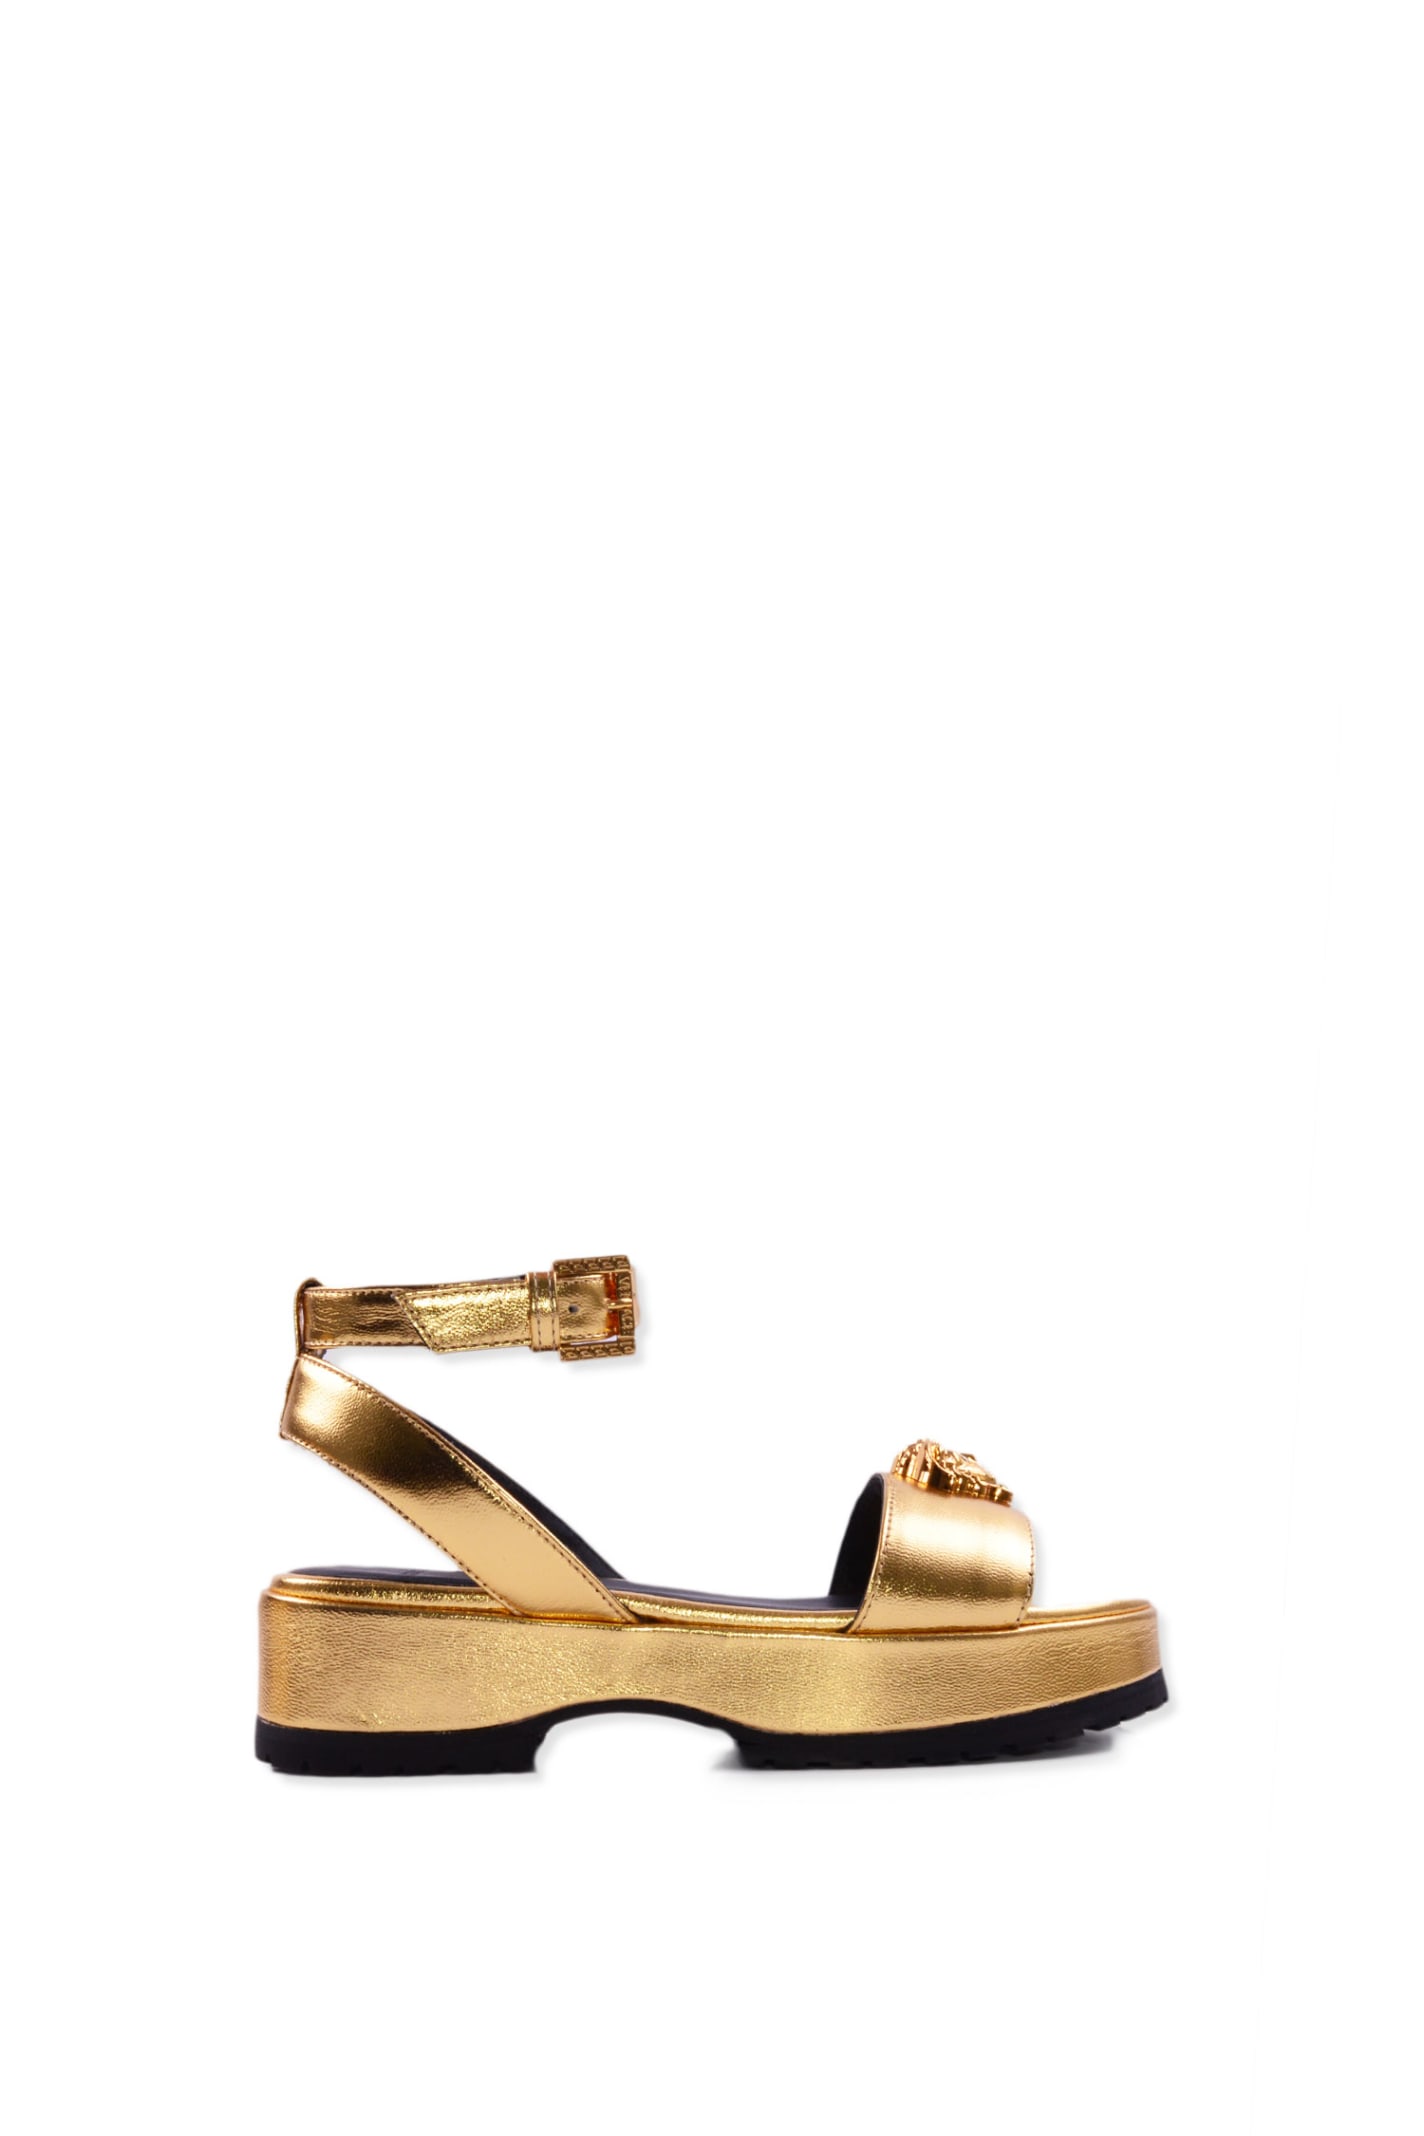 Versace Kids' Girls Gold Leather Sandals